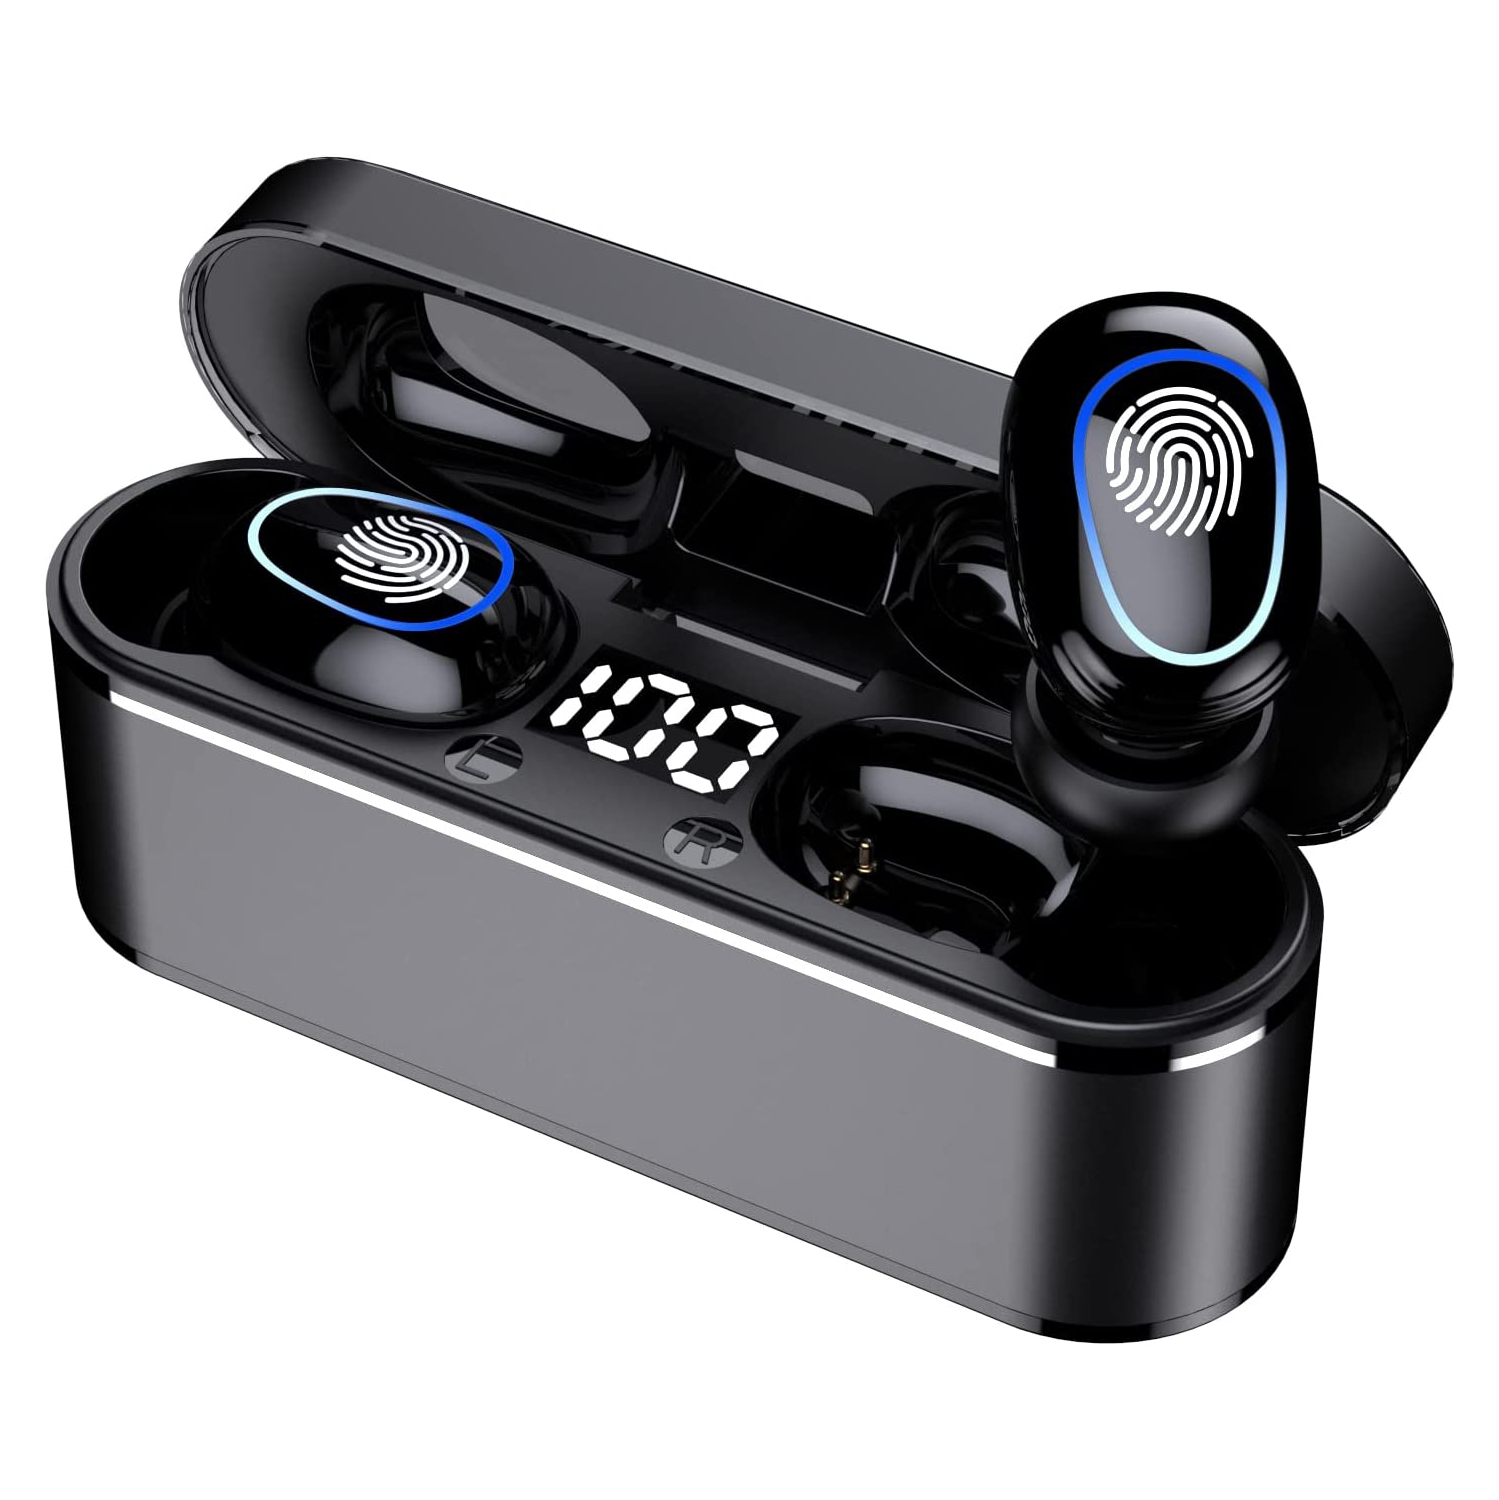 Dolaer Wireless Earbuds Bluetooth 5.1 True Wireless Earbuds with Microphone,Noise Cancelling Wireless Ear Buds,Smallest Earbuds for Android,iOS,Ear Phone Wireless Earbuds,audifonos